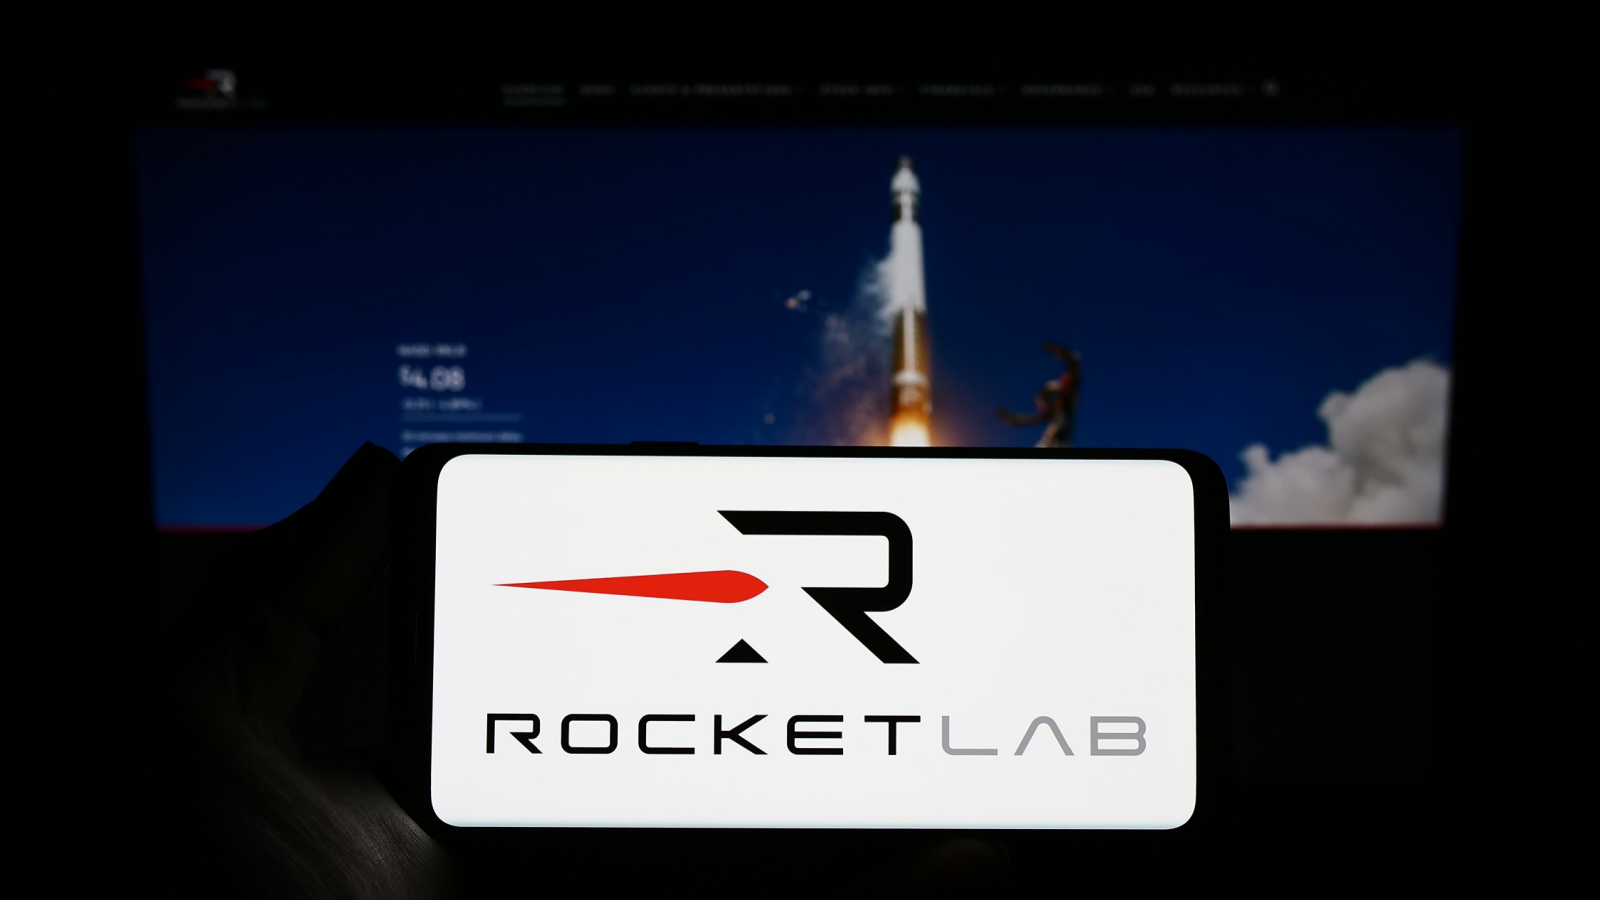 Rocket Lab (RKLB) Stock Crashes Following Launch Failure | InvestorPlace